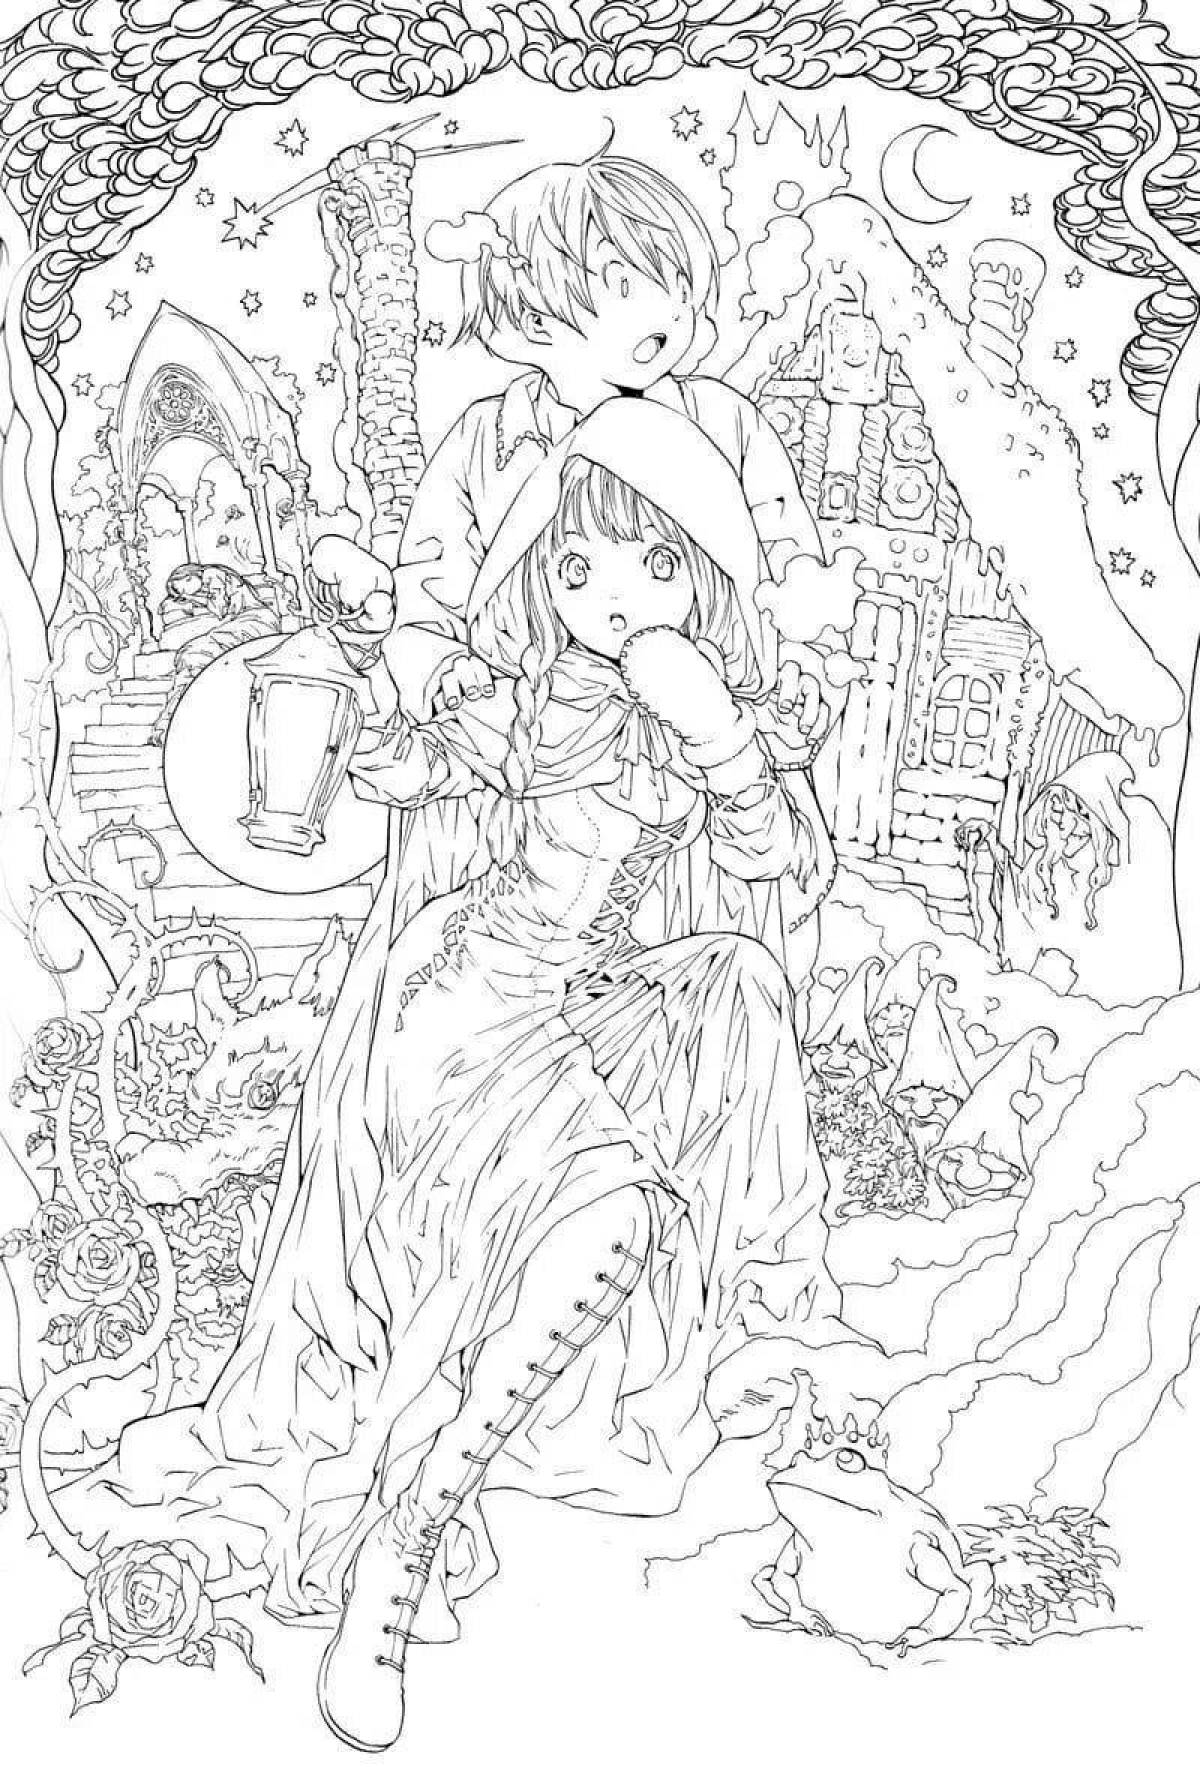 A fun anime coloring book for adults